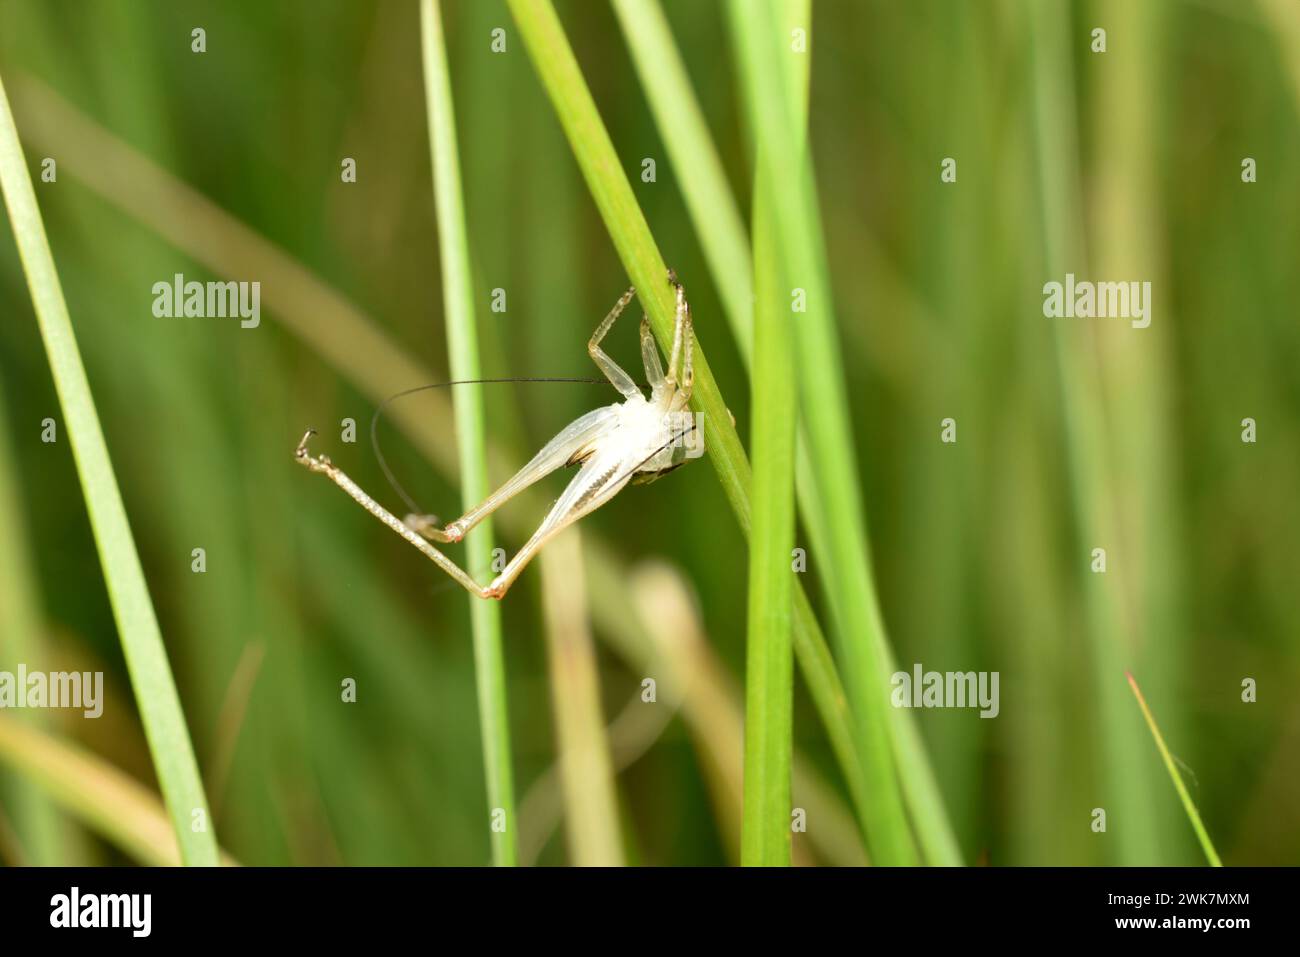 After molting, the old shed skin of the grasshopper remained hanging on the grass stem. Stock Photo